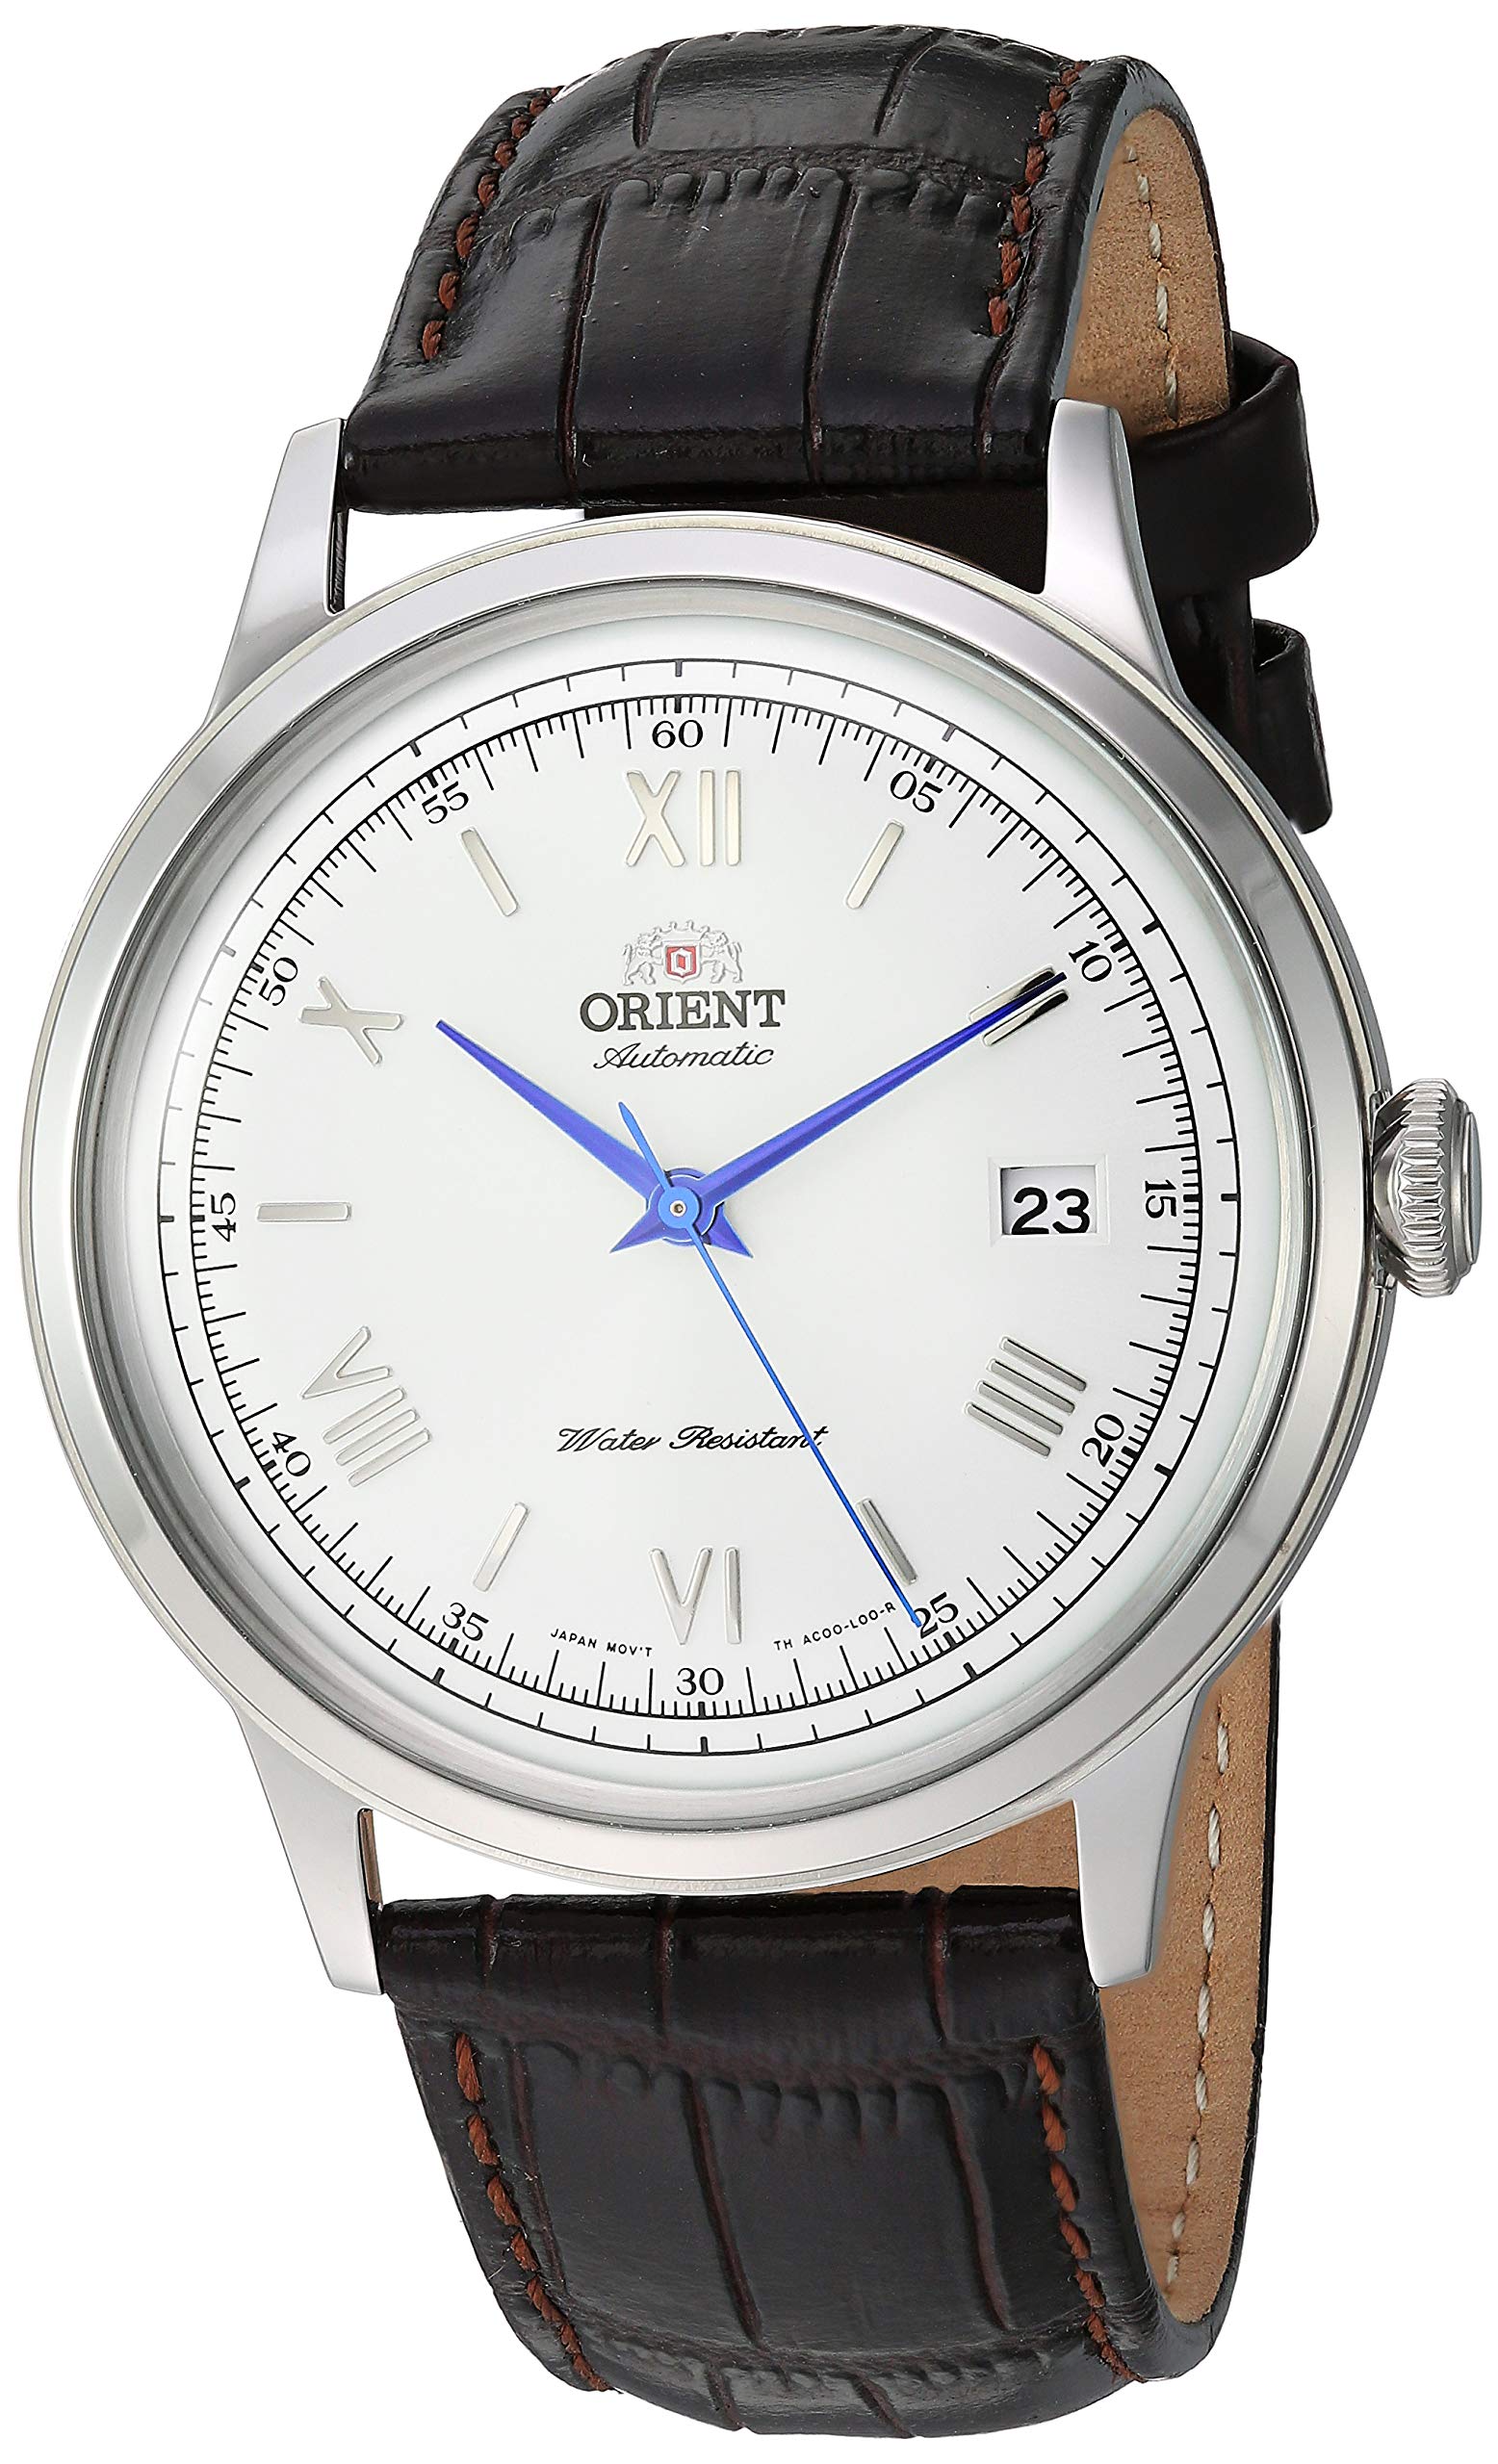 Orient 'Bambino Version 2' Stainless Steel Japanese Automatic / Hand-Winding Dress Watch